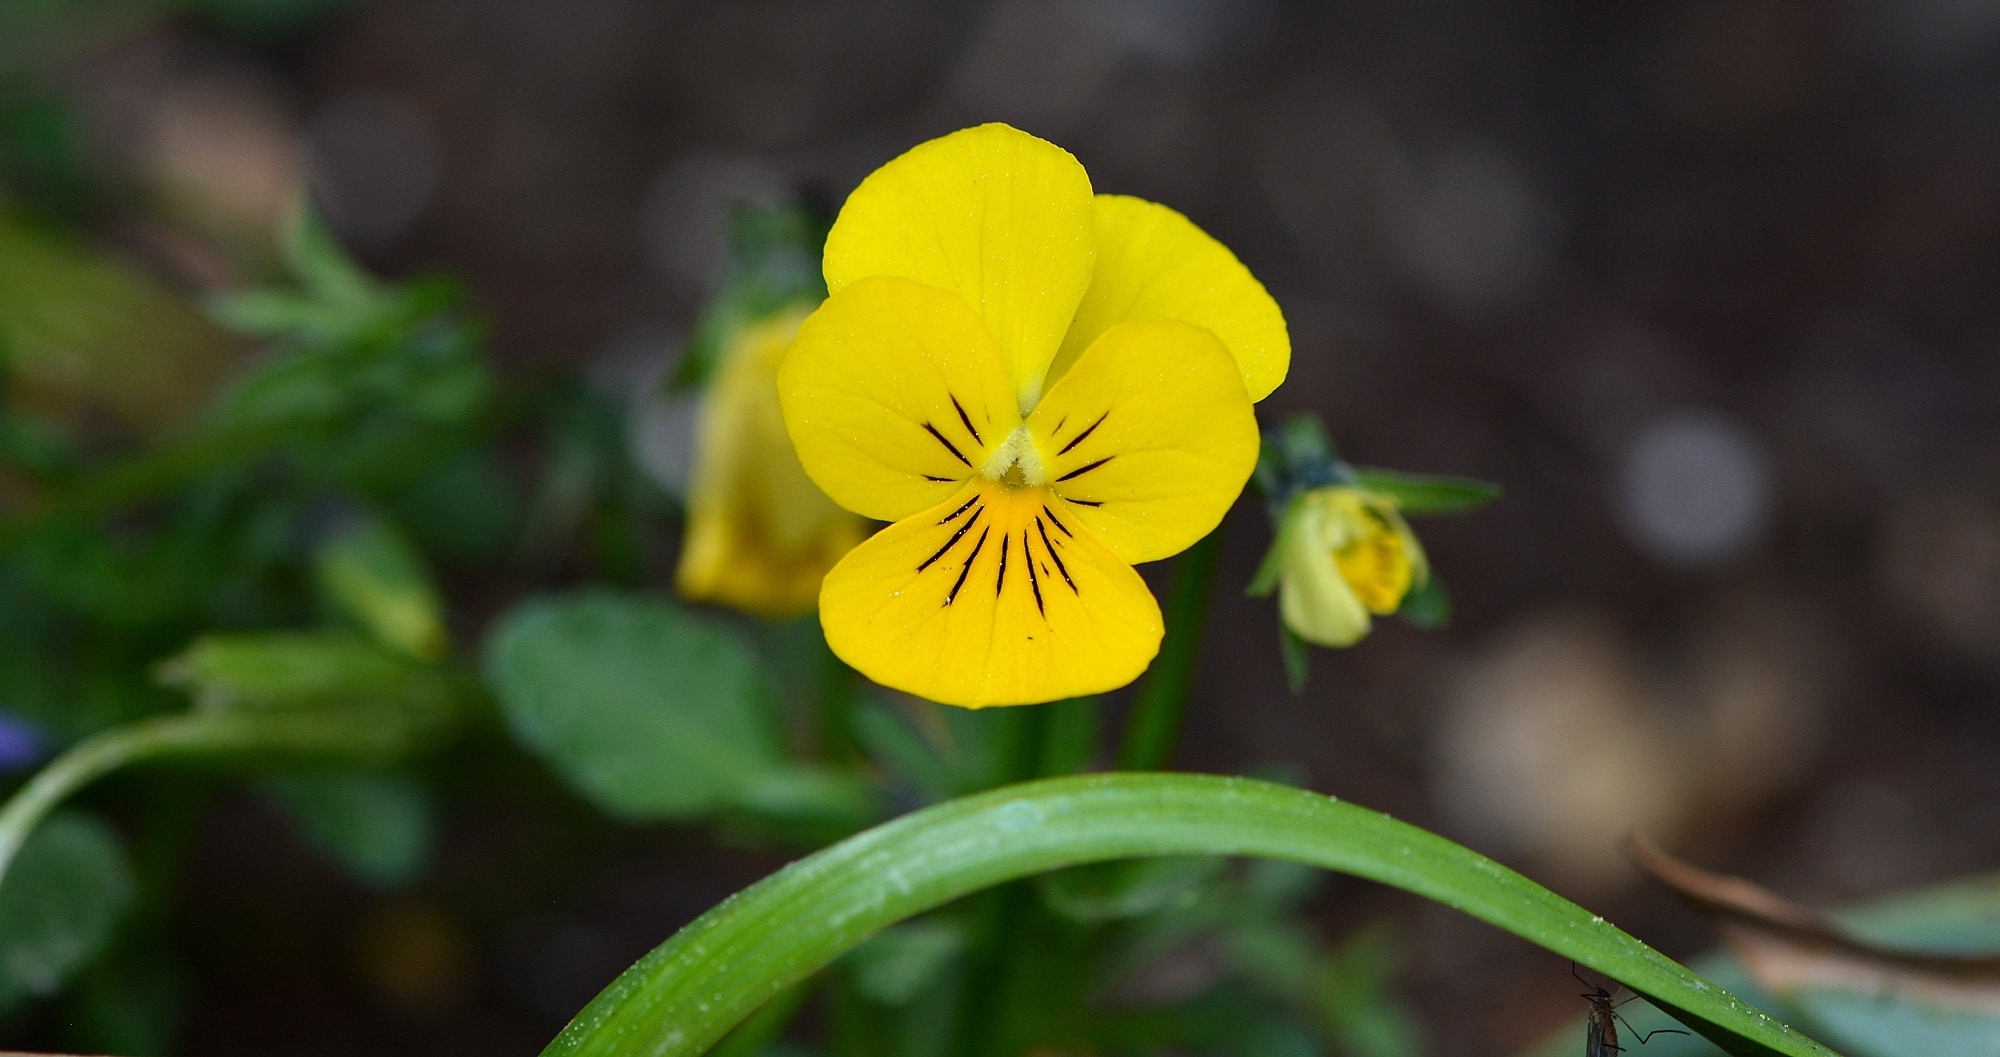 shallow focus photo of yellow flower with green leaves